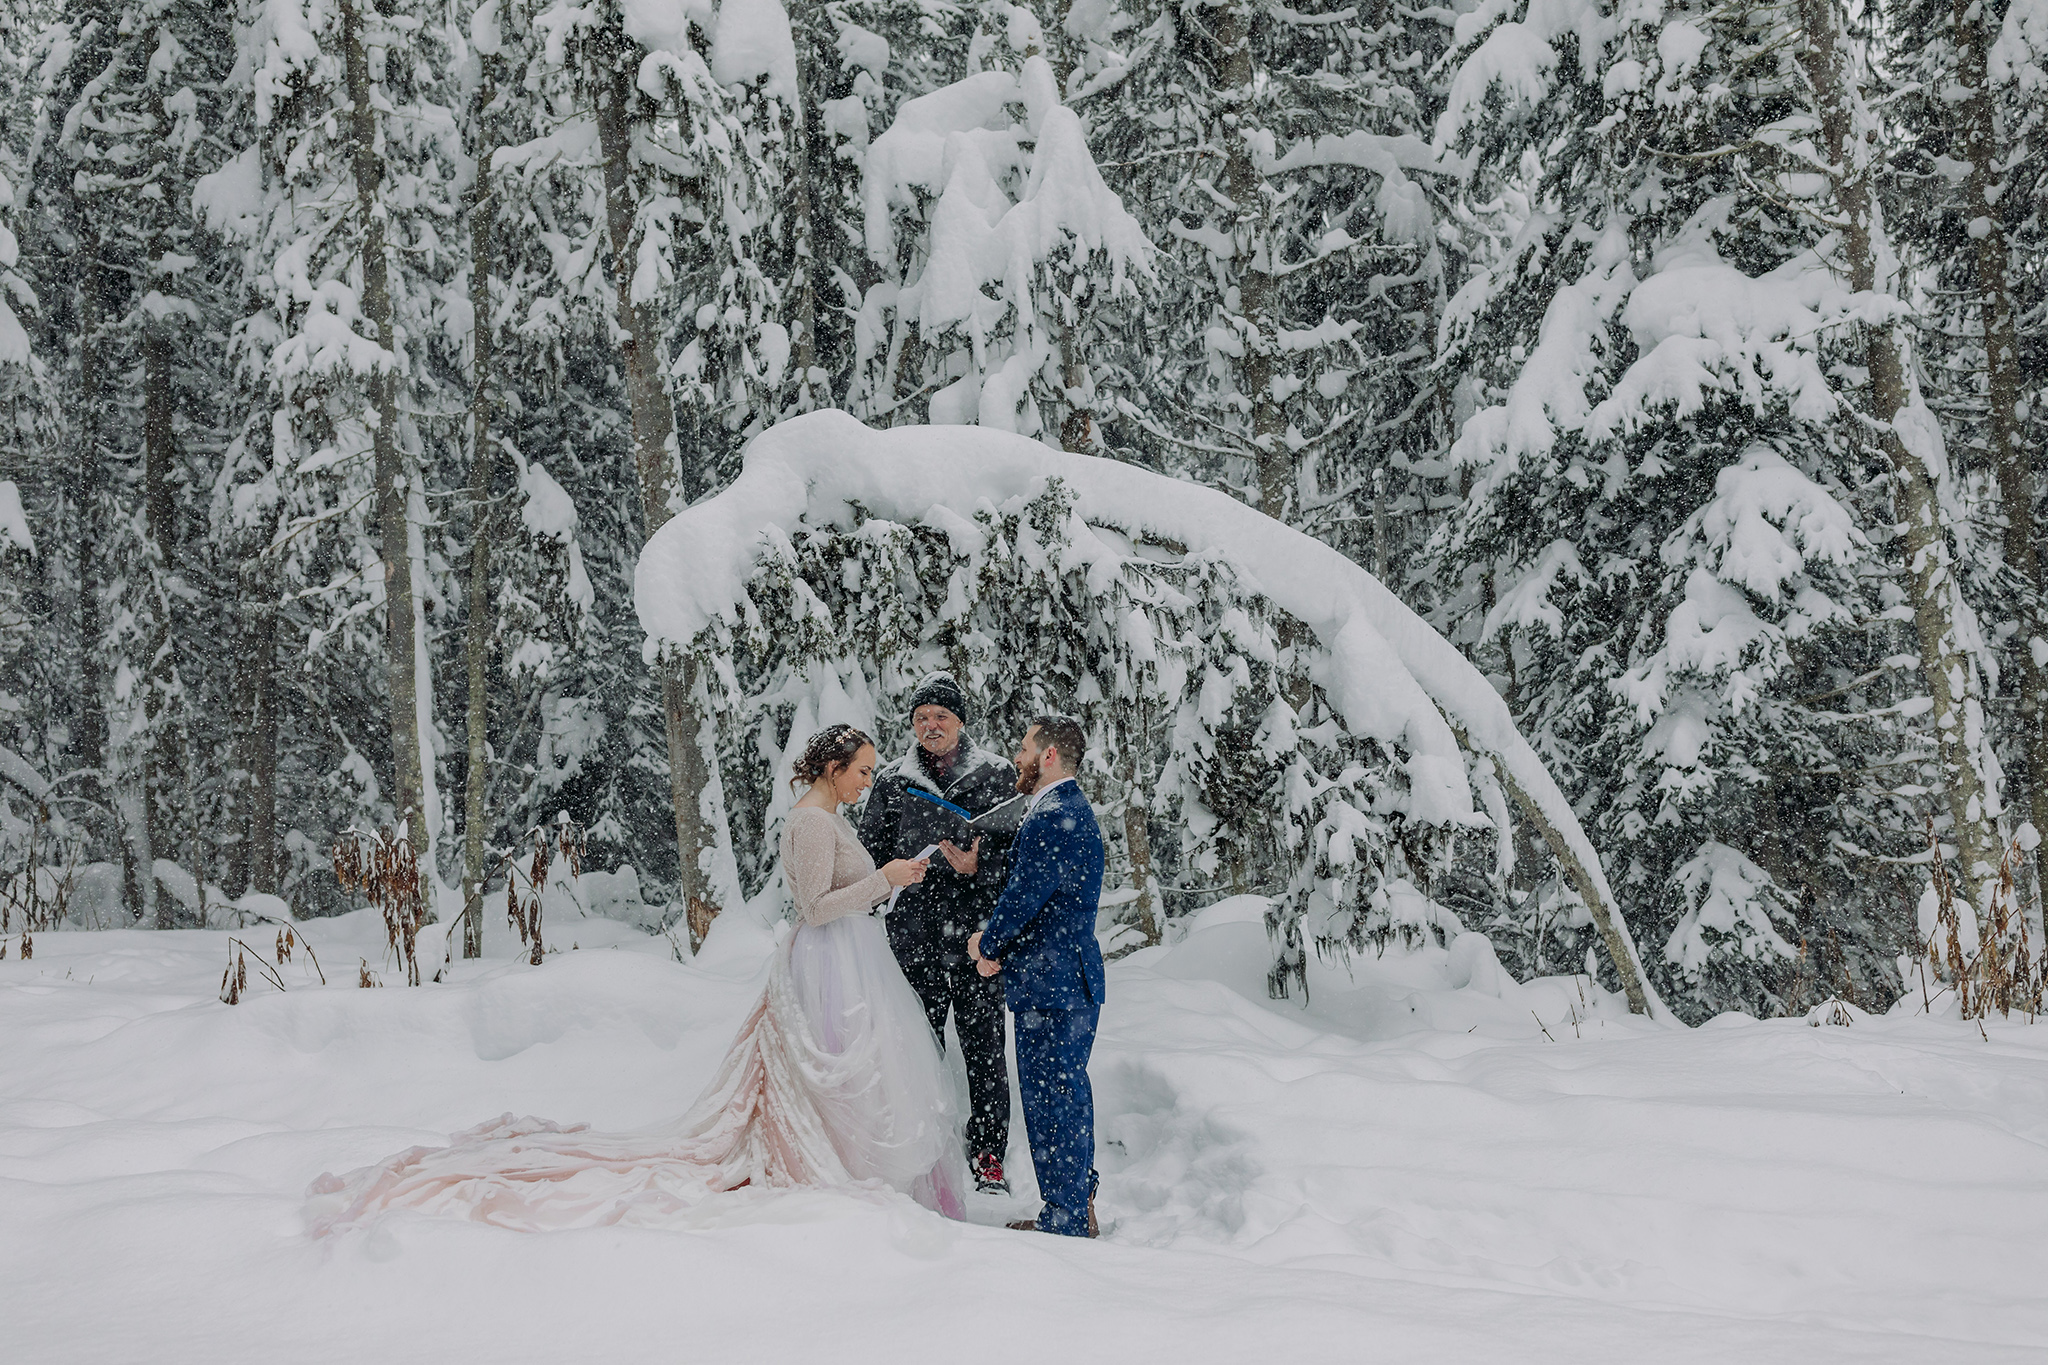 Elope in Lake Louise with a magical snowy outdoor winter wonderland forest wedding ceremony